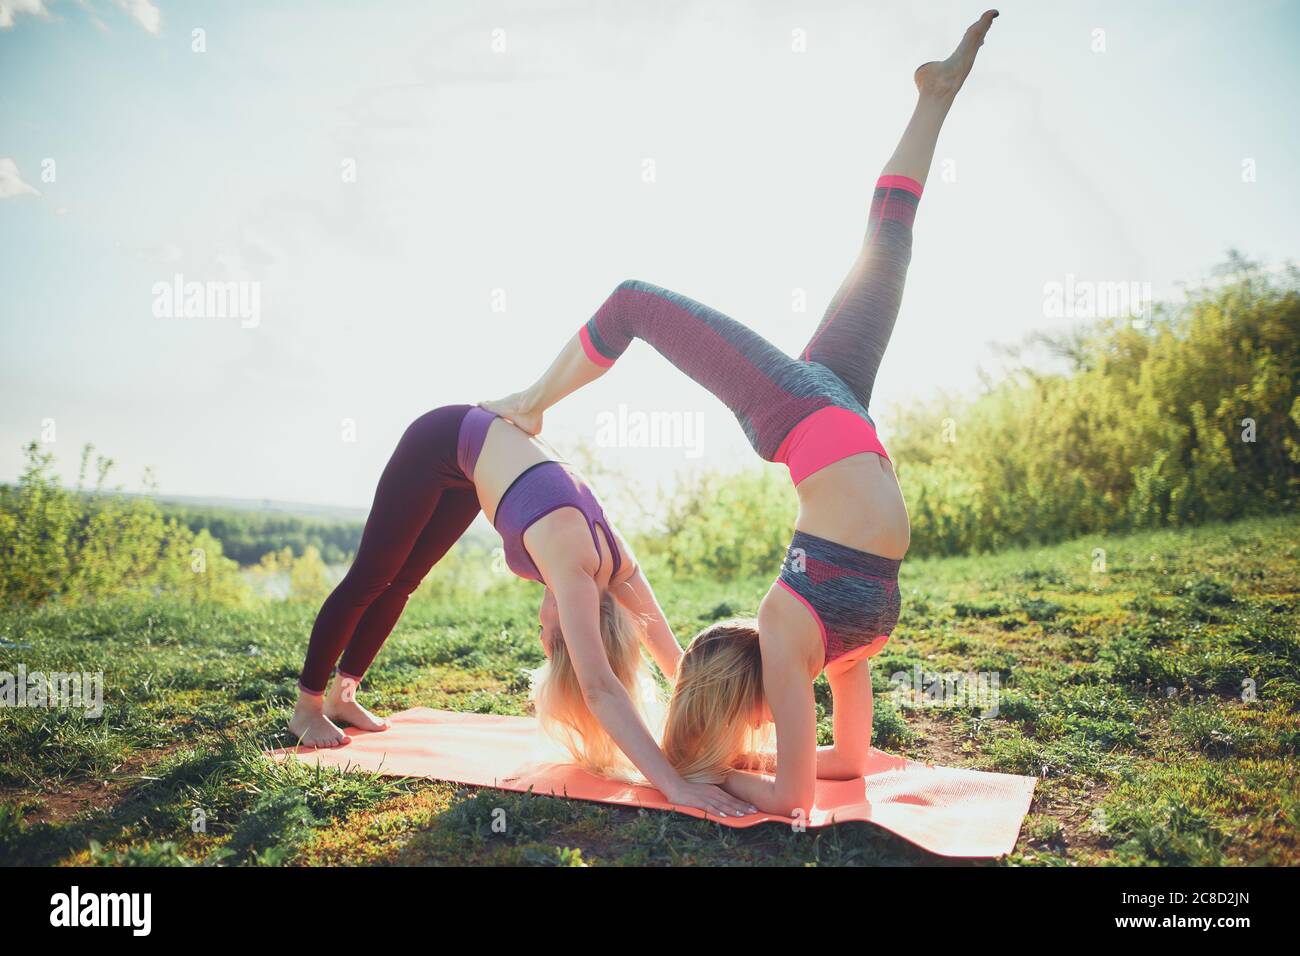 two women contorsionist practicing gymnastic yoga outdoor Stock Photo